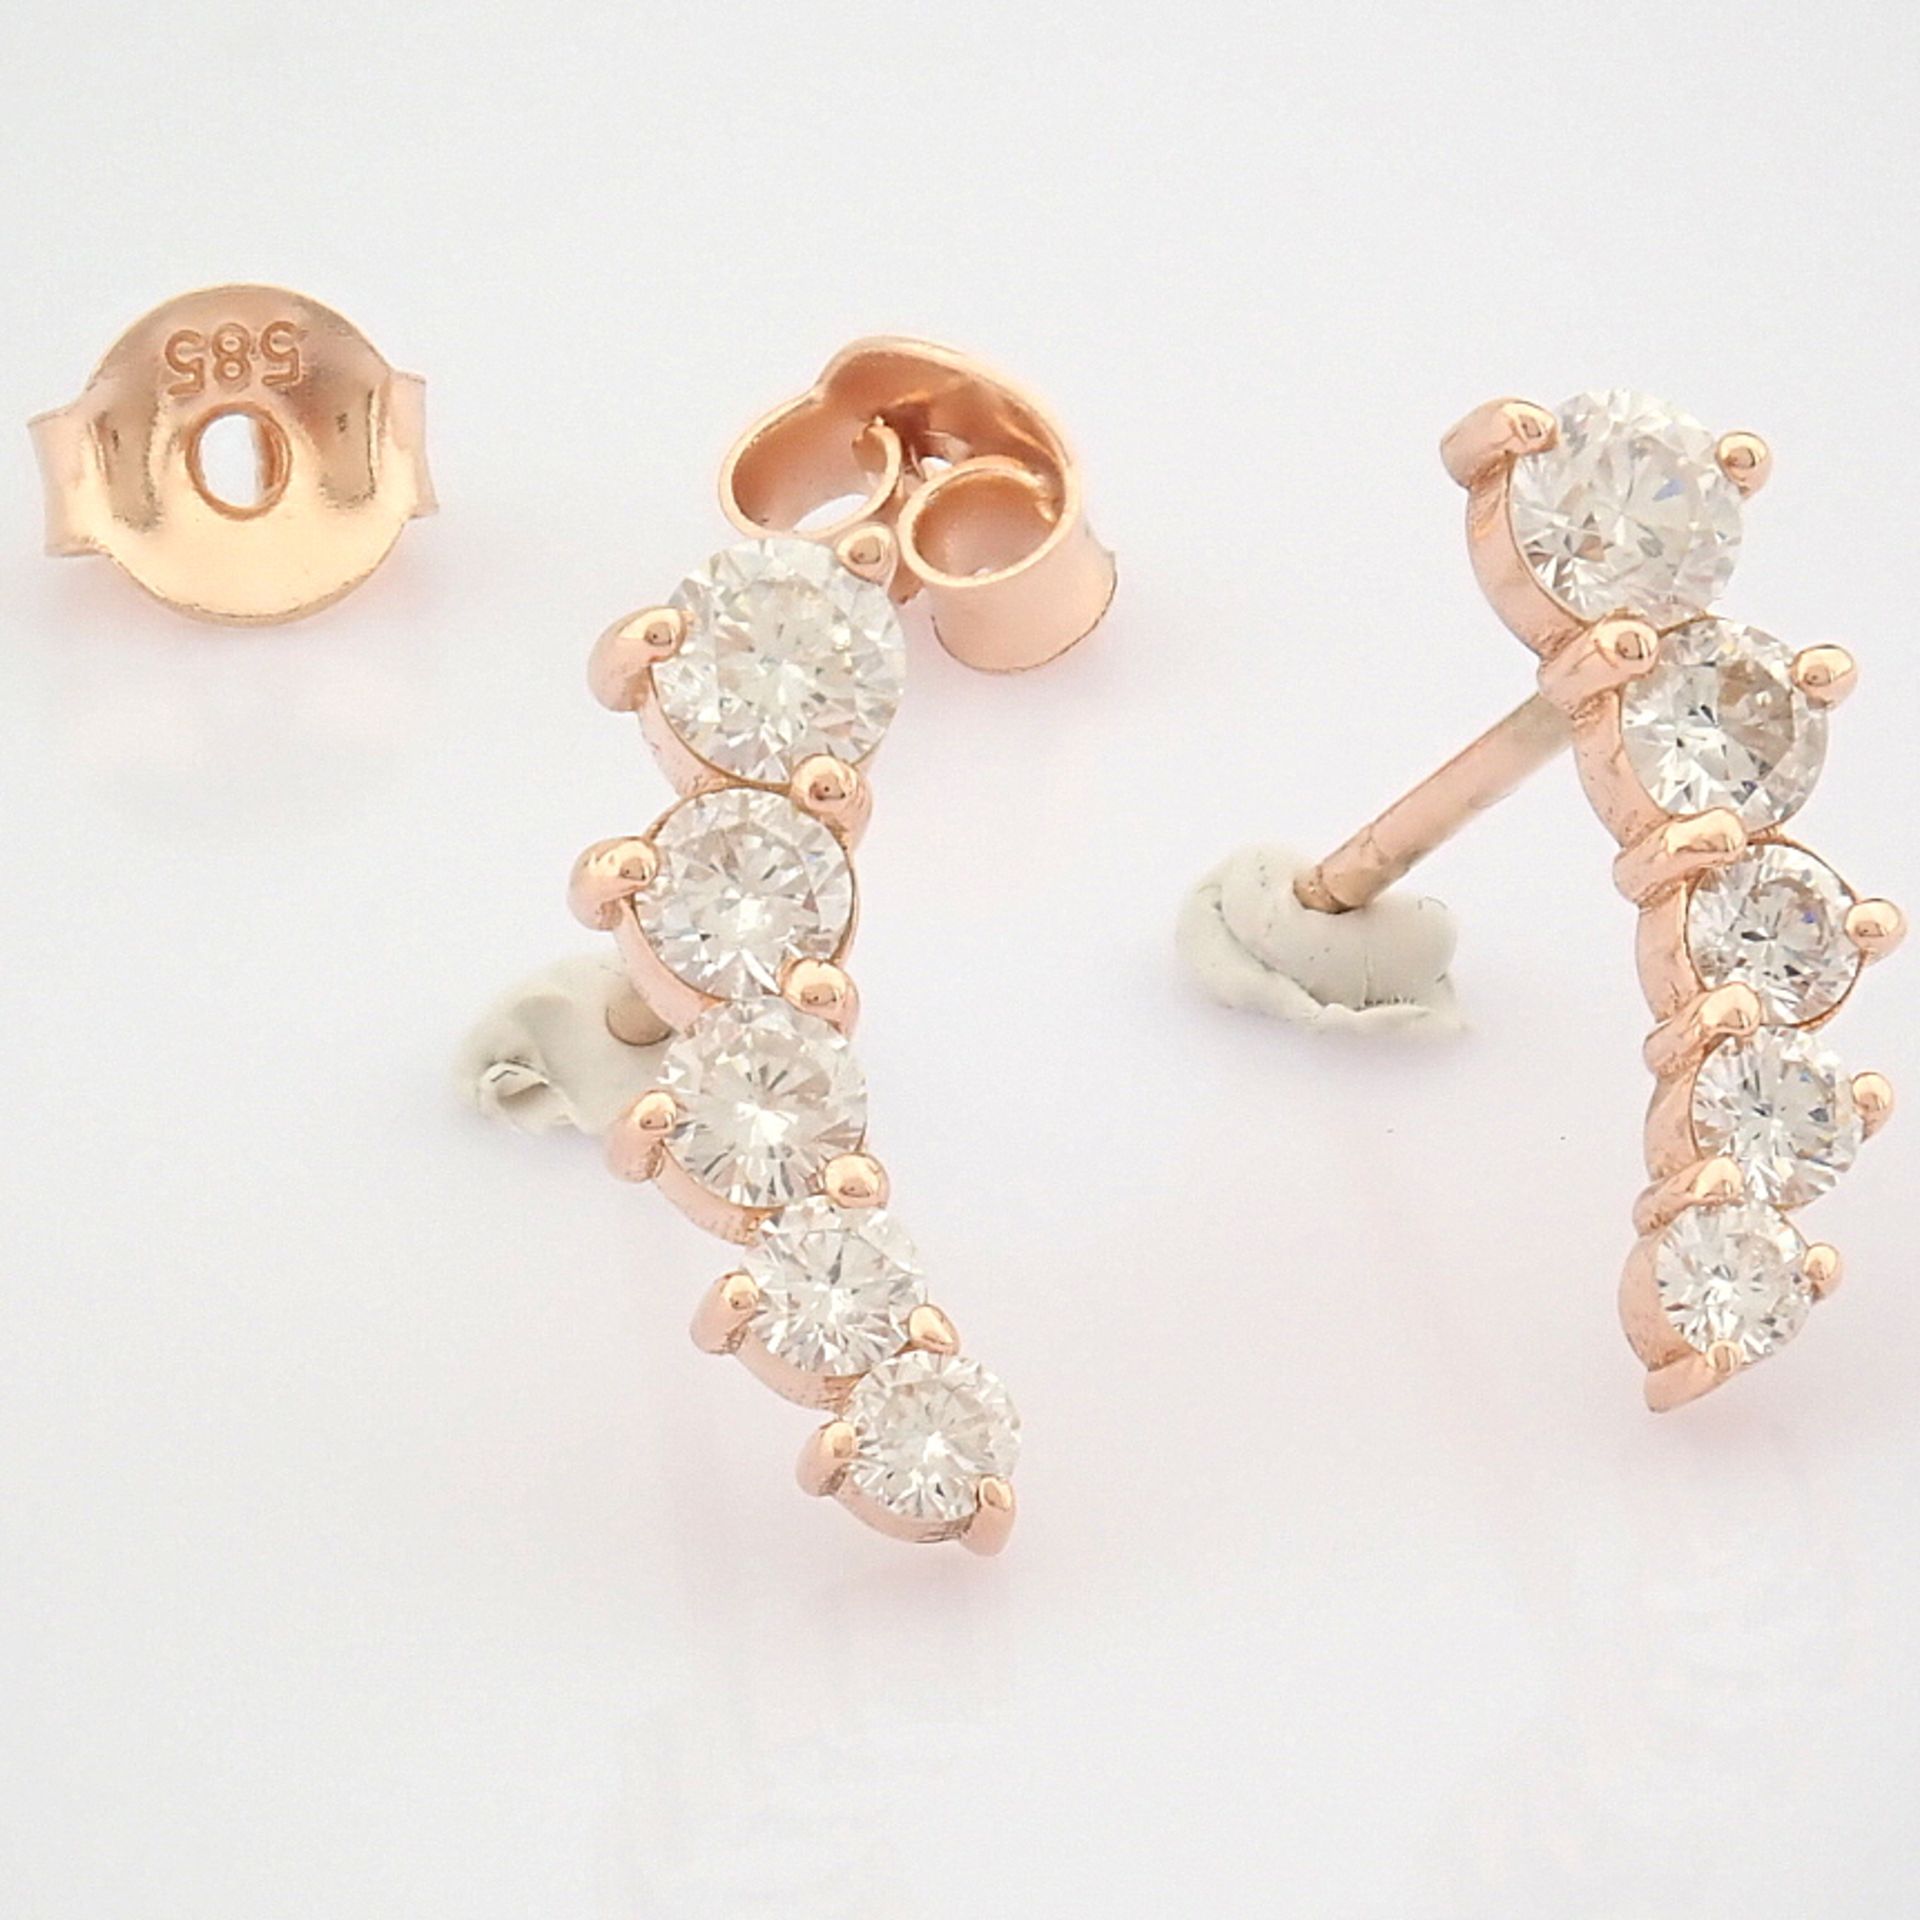 Certificated 14K Rose/Pink Gold Diamond Earring (Total 0.53 ct Stone) - Image 4 of 7